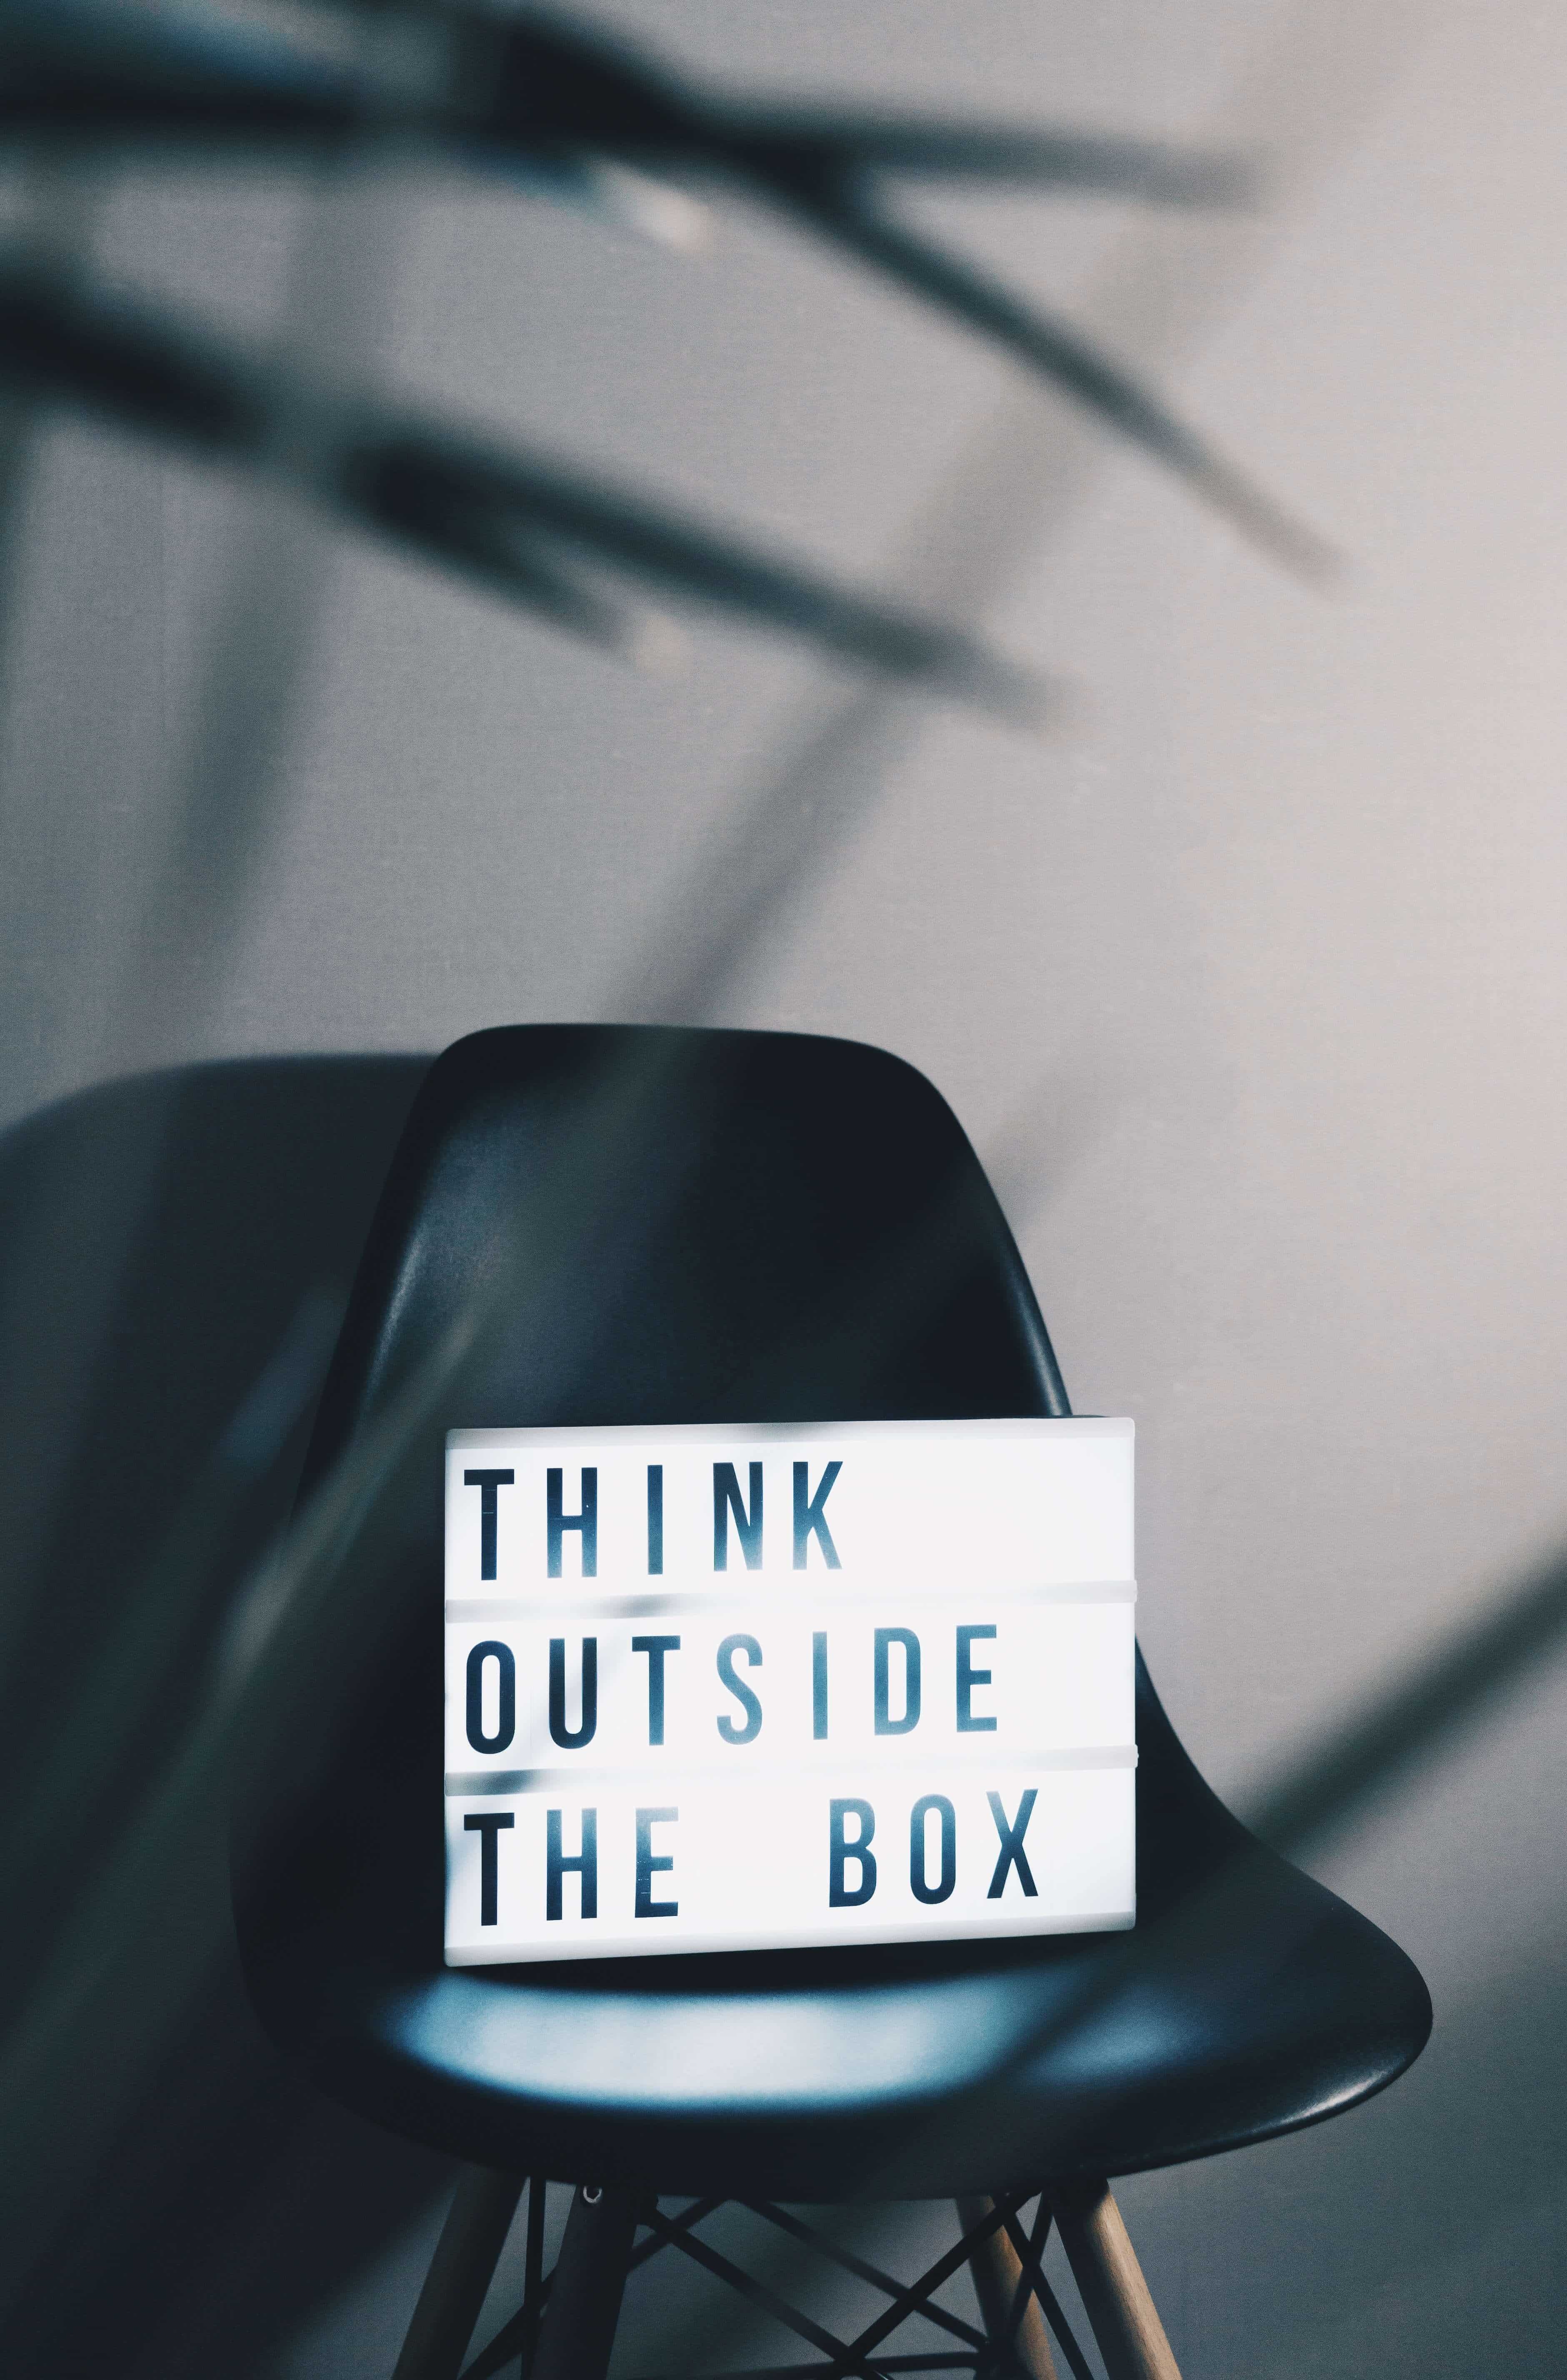 Think outside the box light box on a black chair